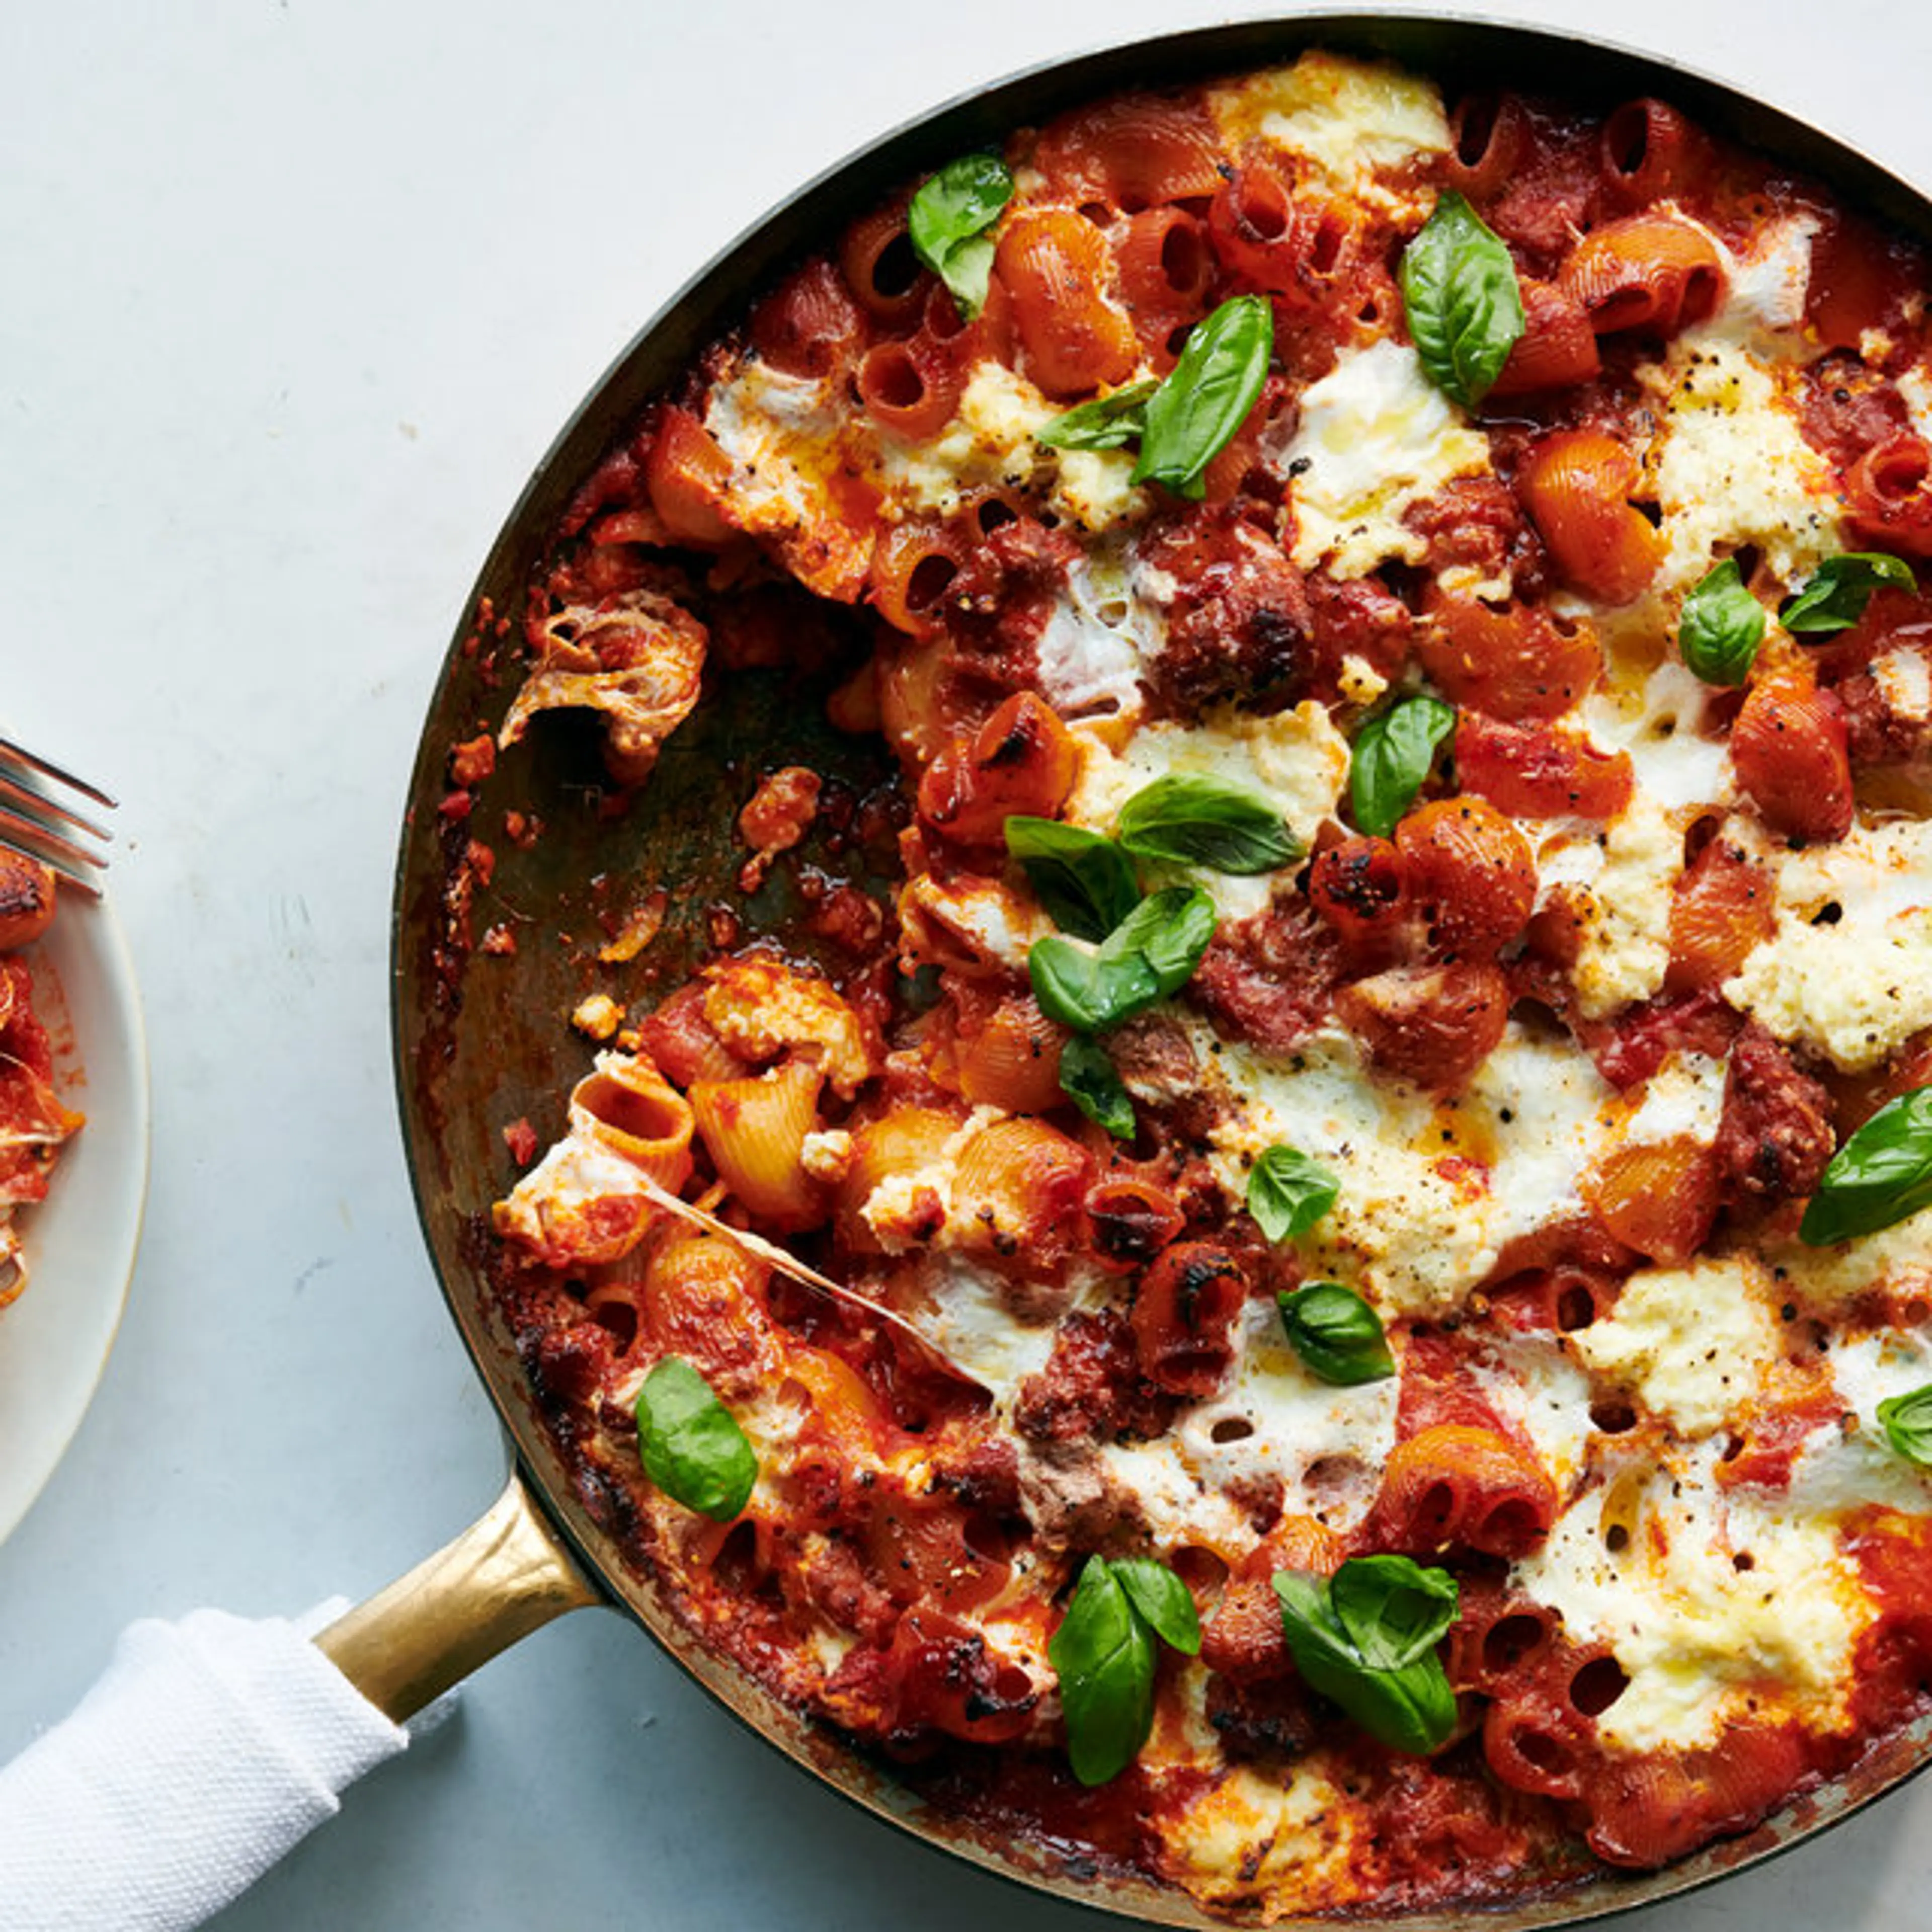 Cheesy Baked Pasta With Sausage and Ricotta